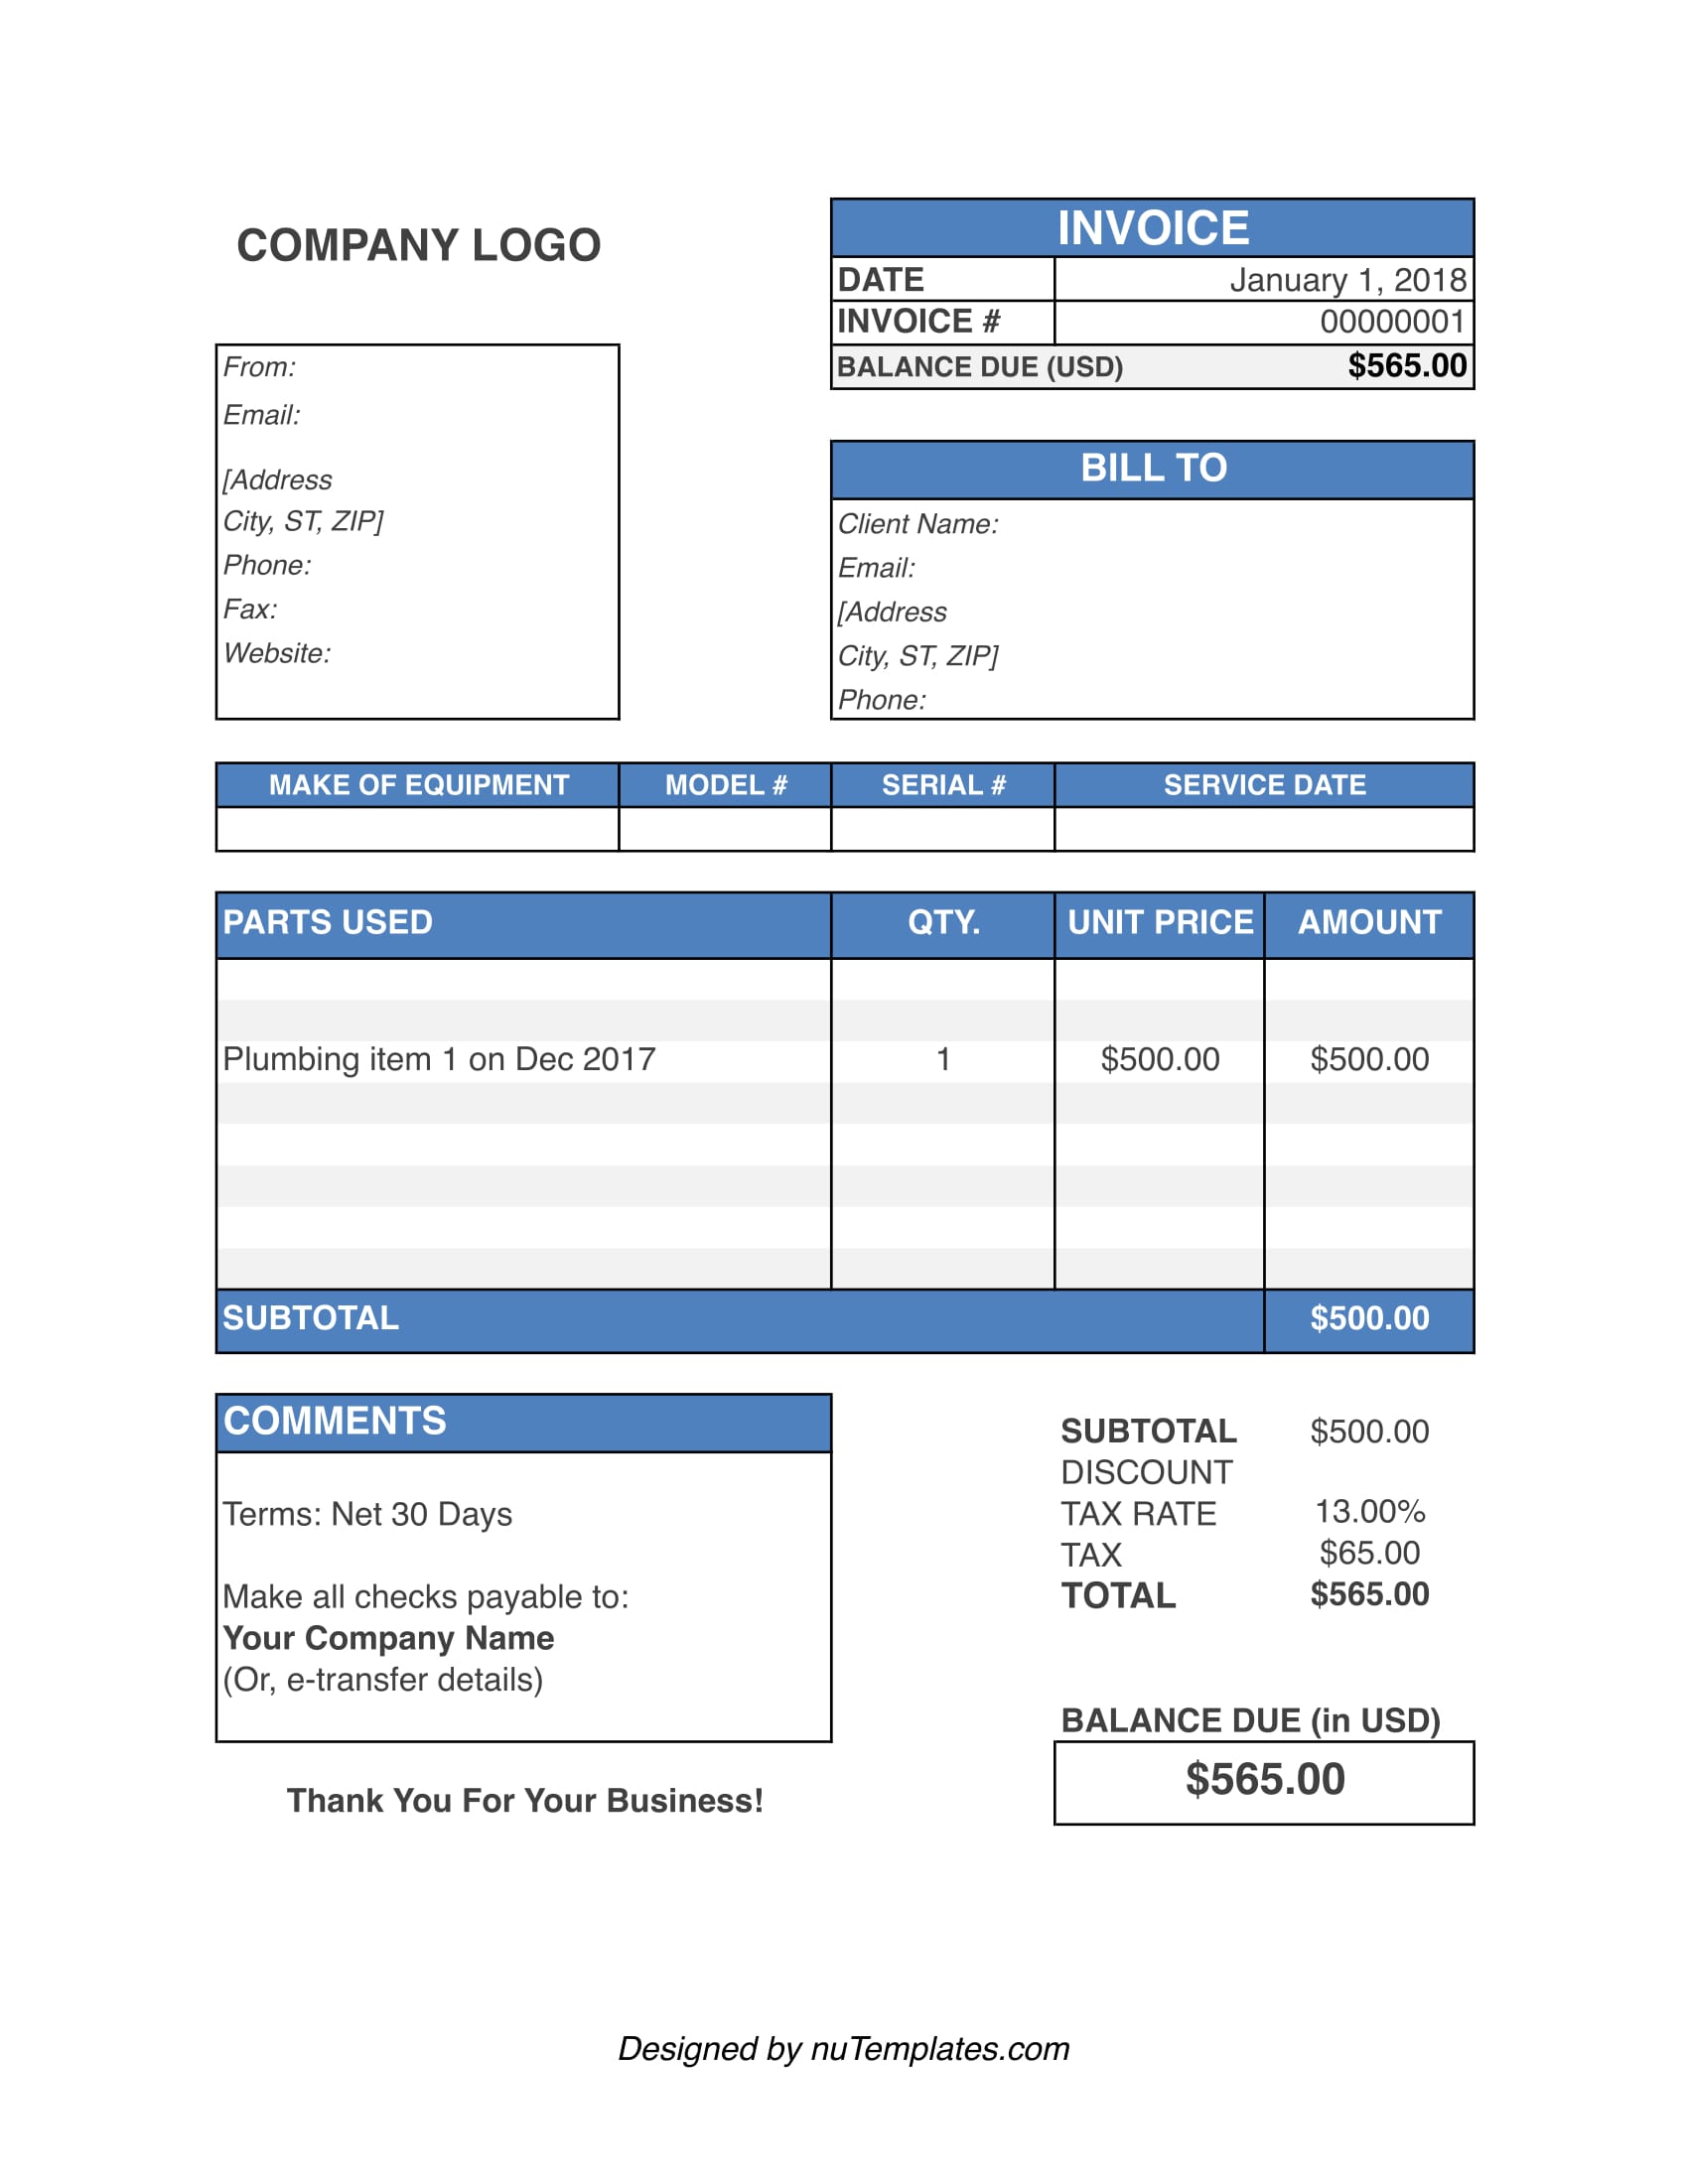 Plumbing Invoice Template - Plumbing Invoices | nuTemplates